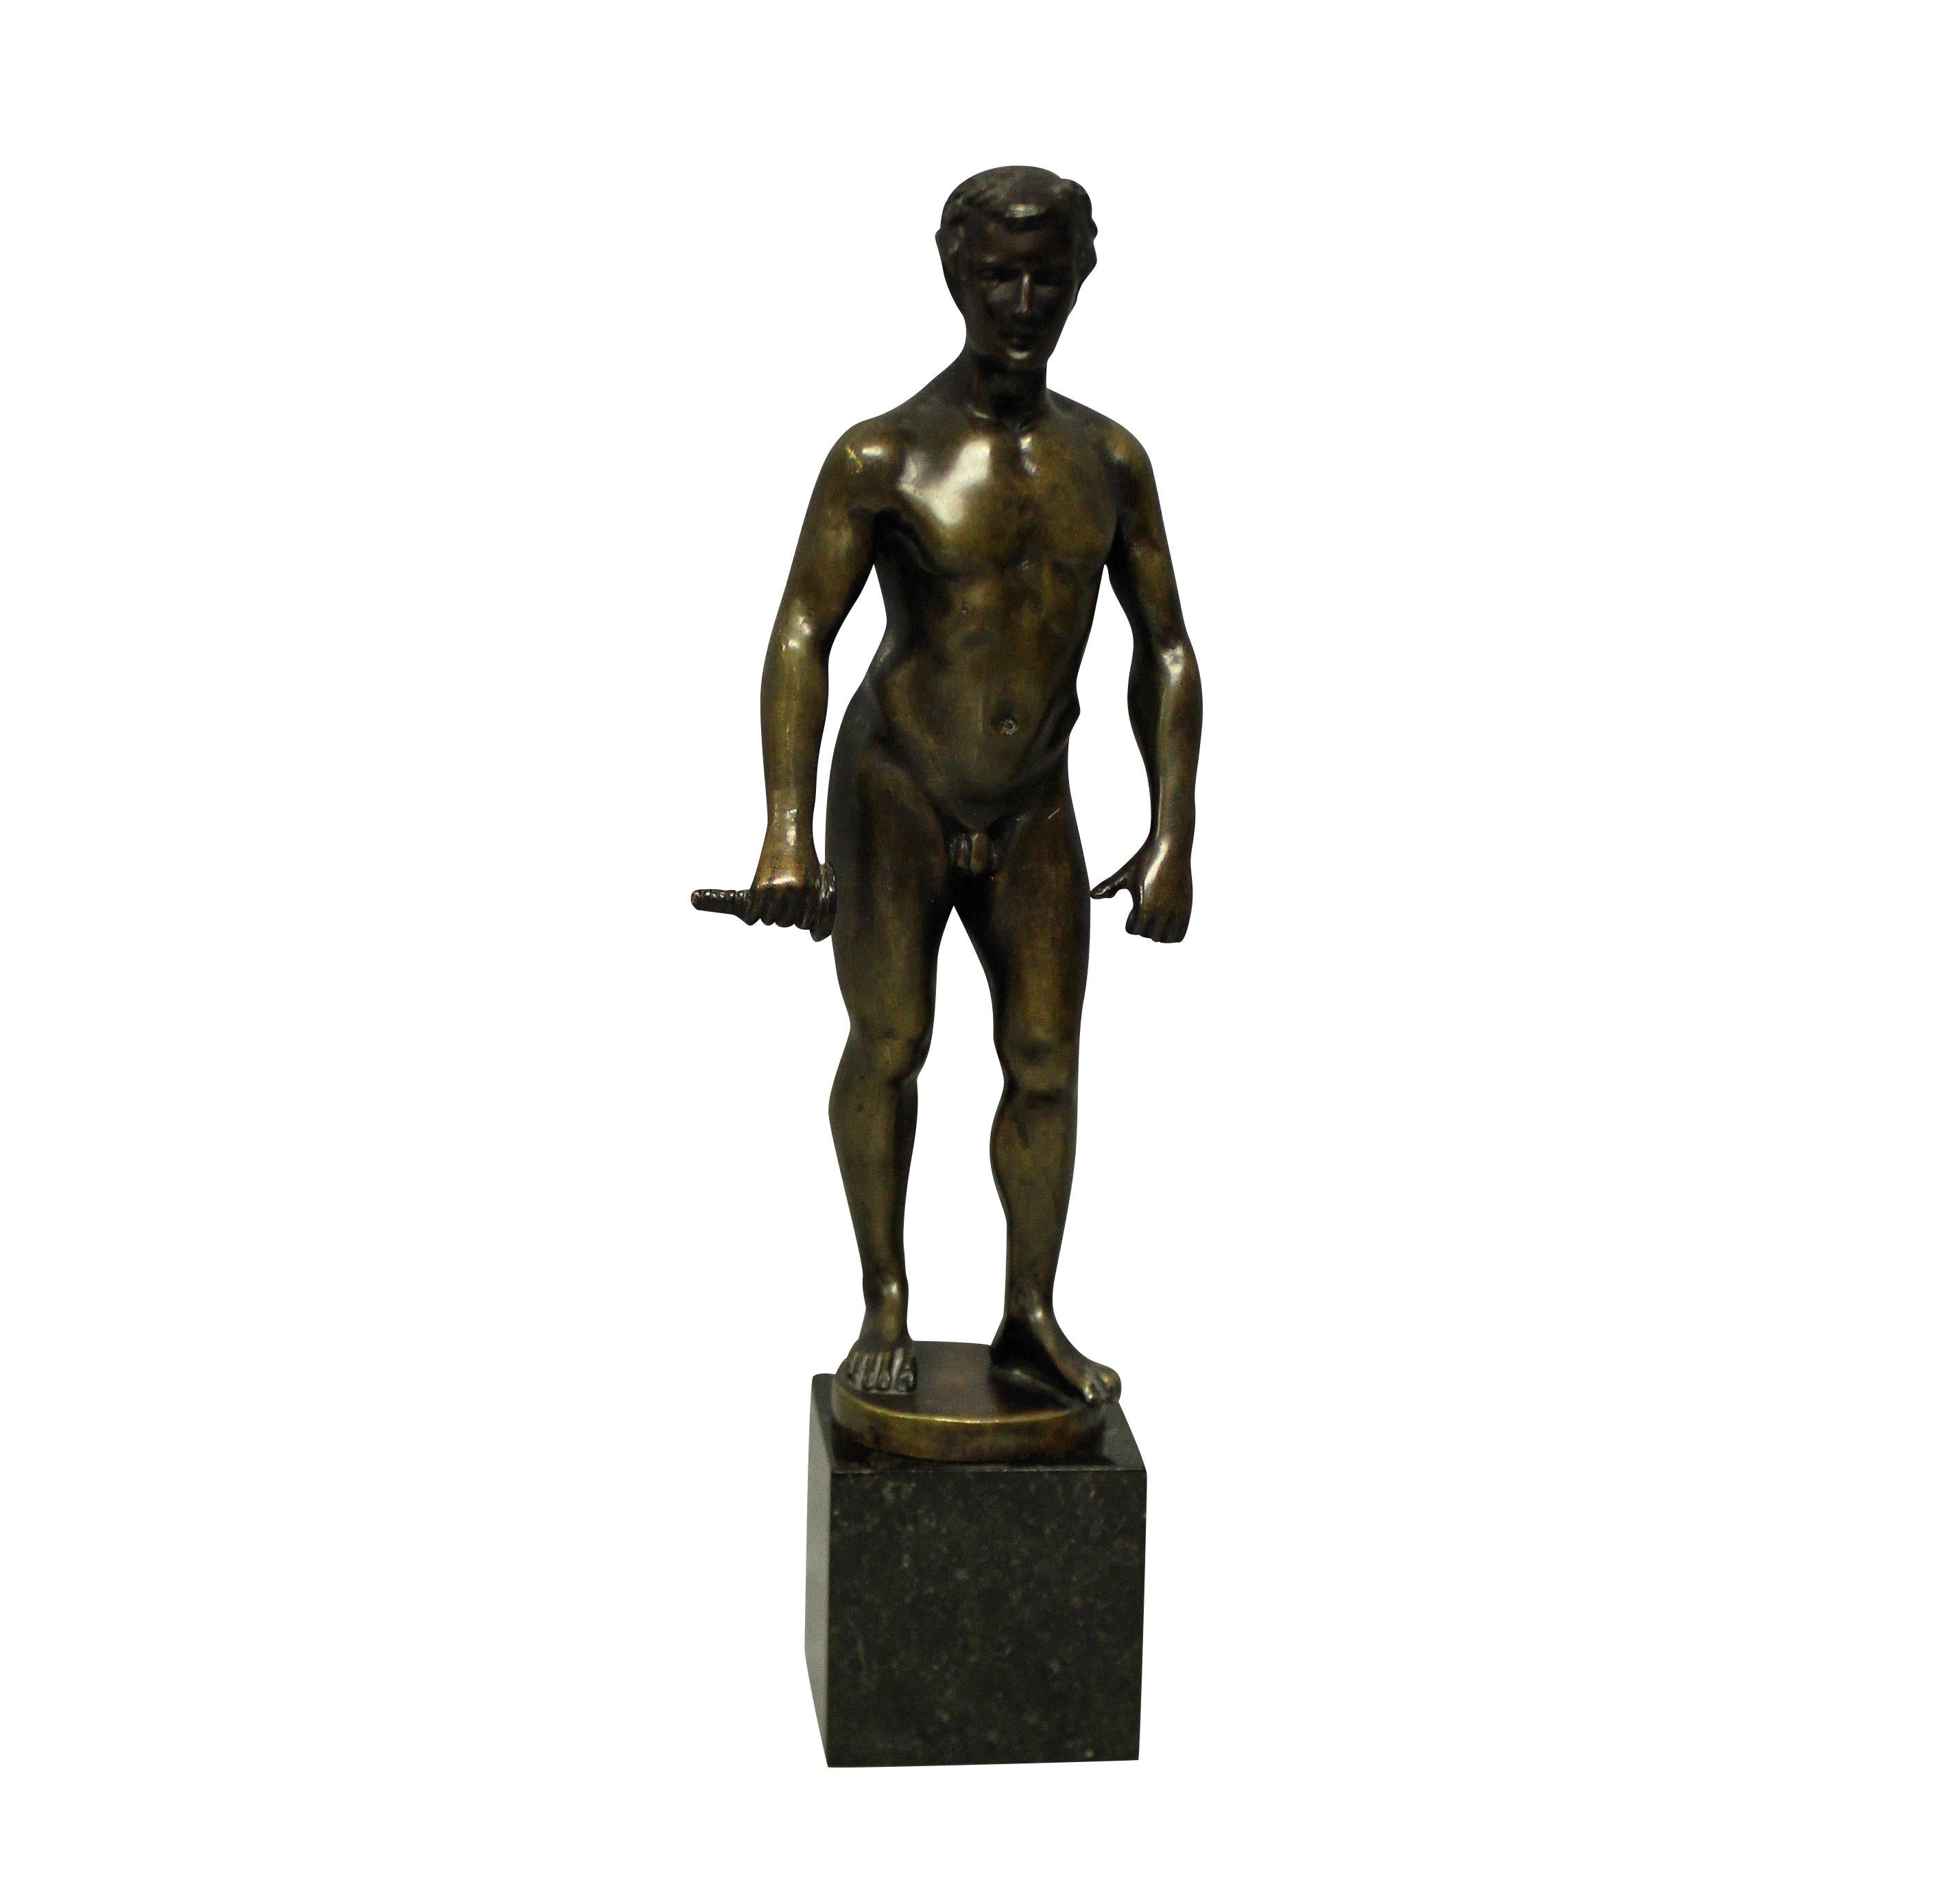 A pair of German bronze male nude figures by Spiro Schwatenberg (who died aged 24), on marble plinths. Signed. The sword blade is missing on one figure.